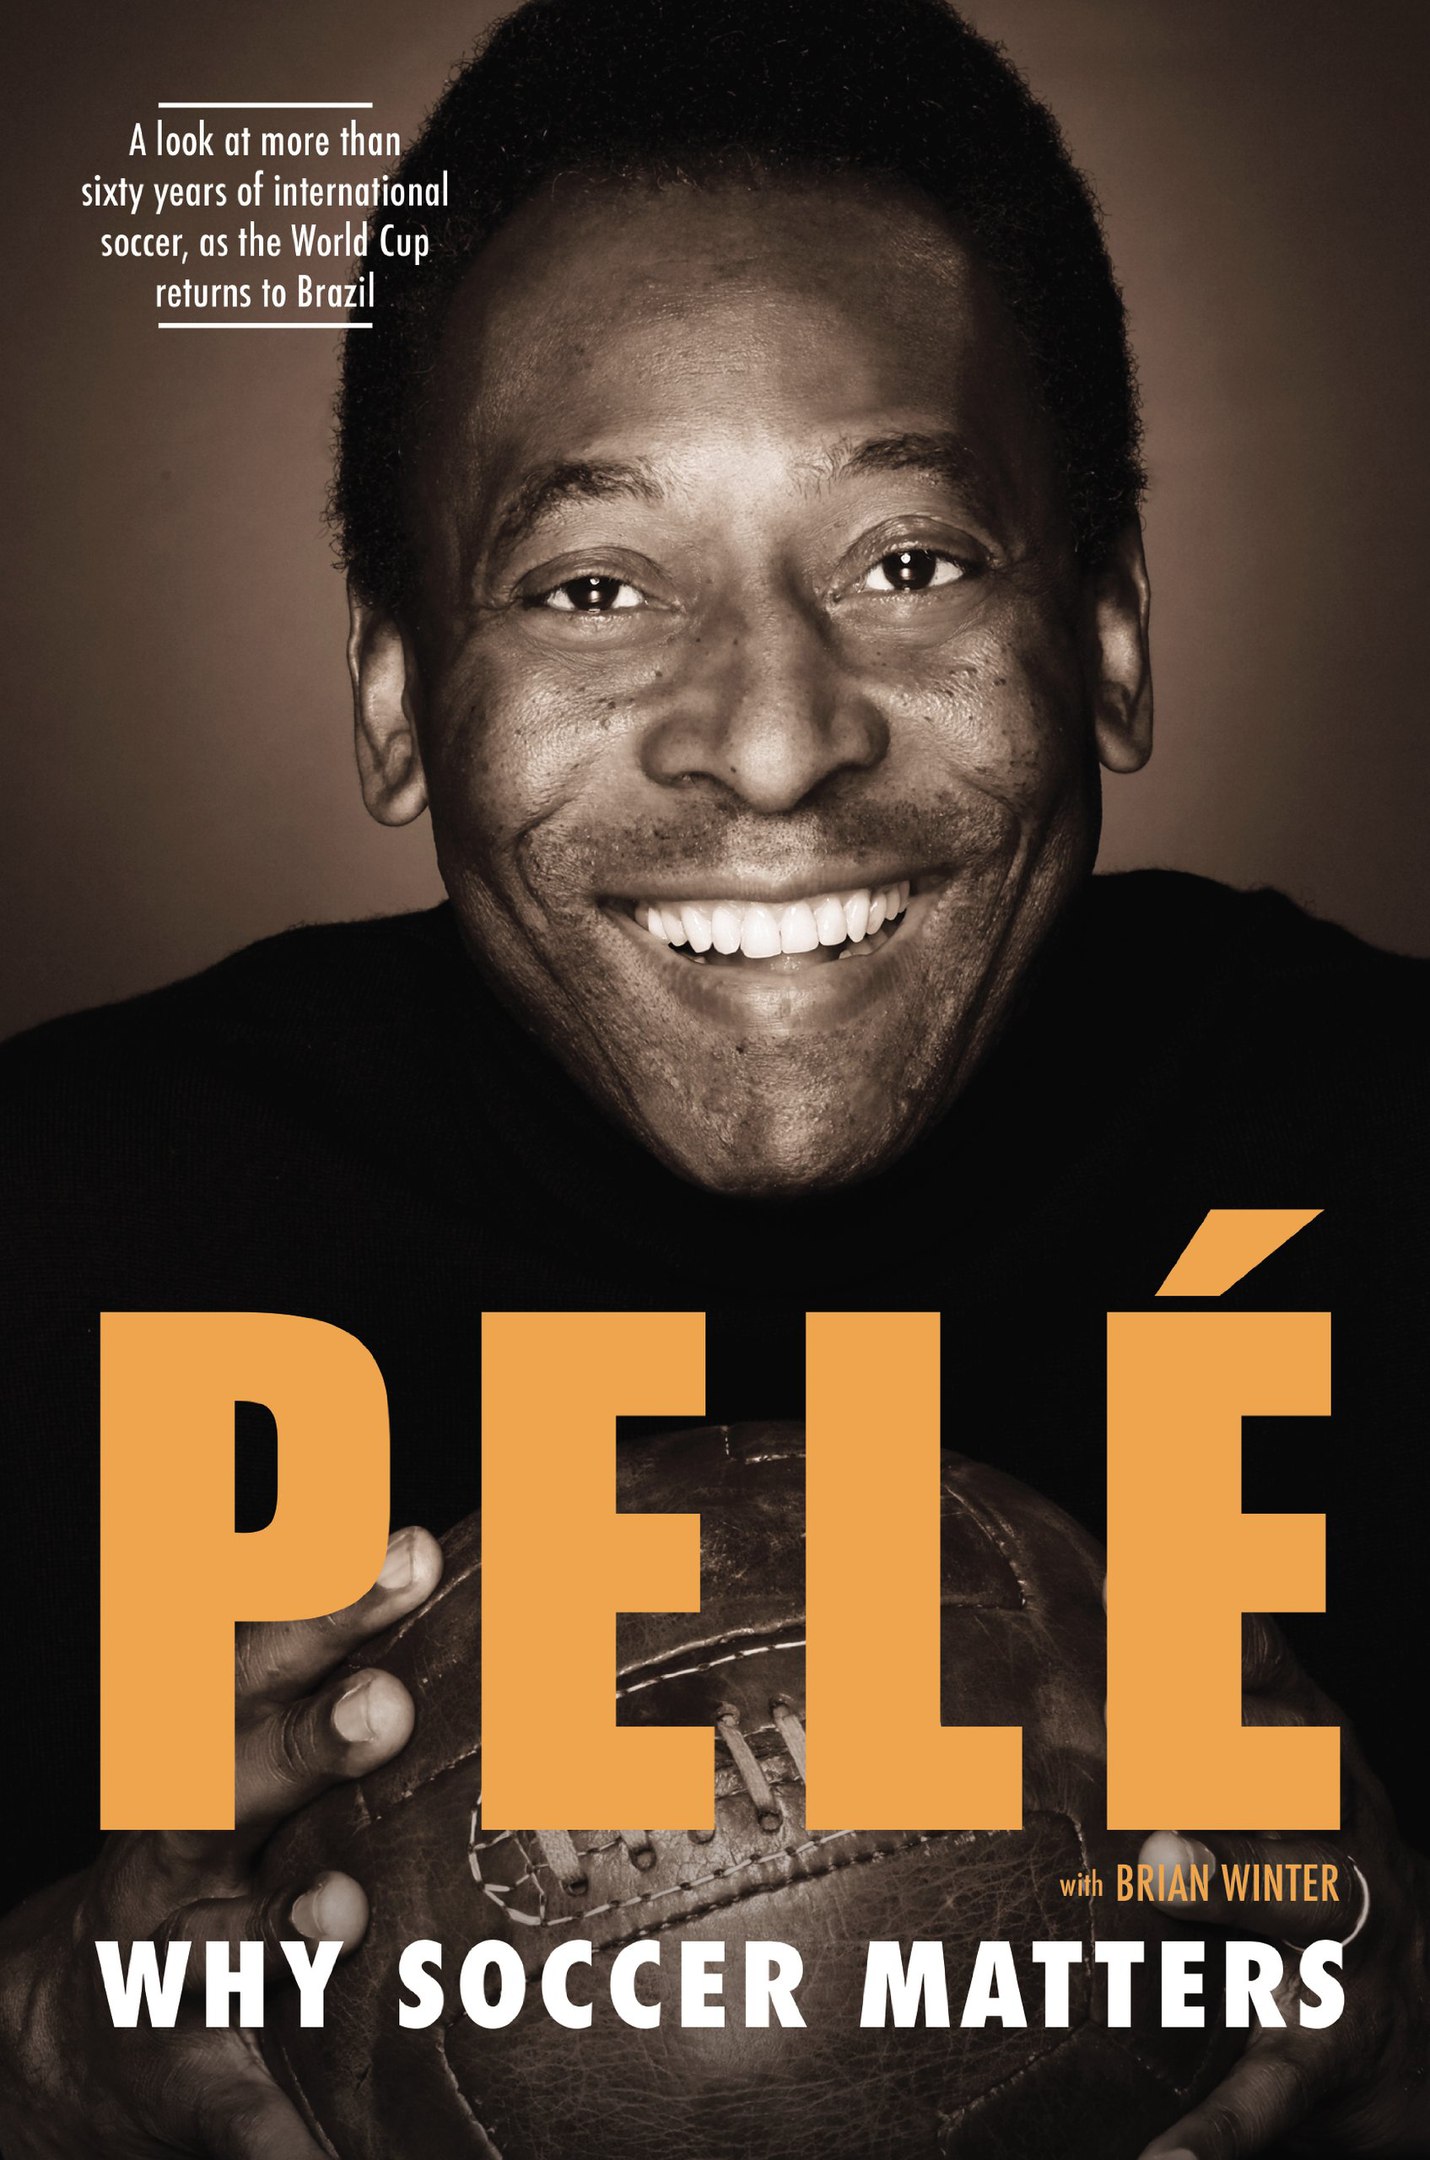 Pele – Why Soccer Matters